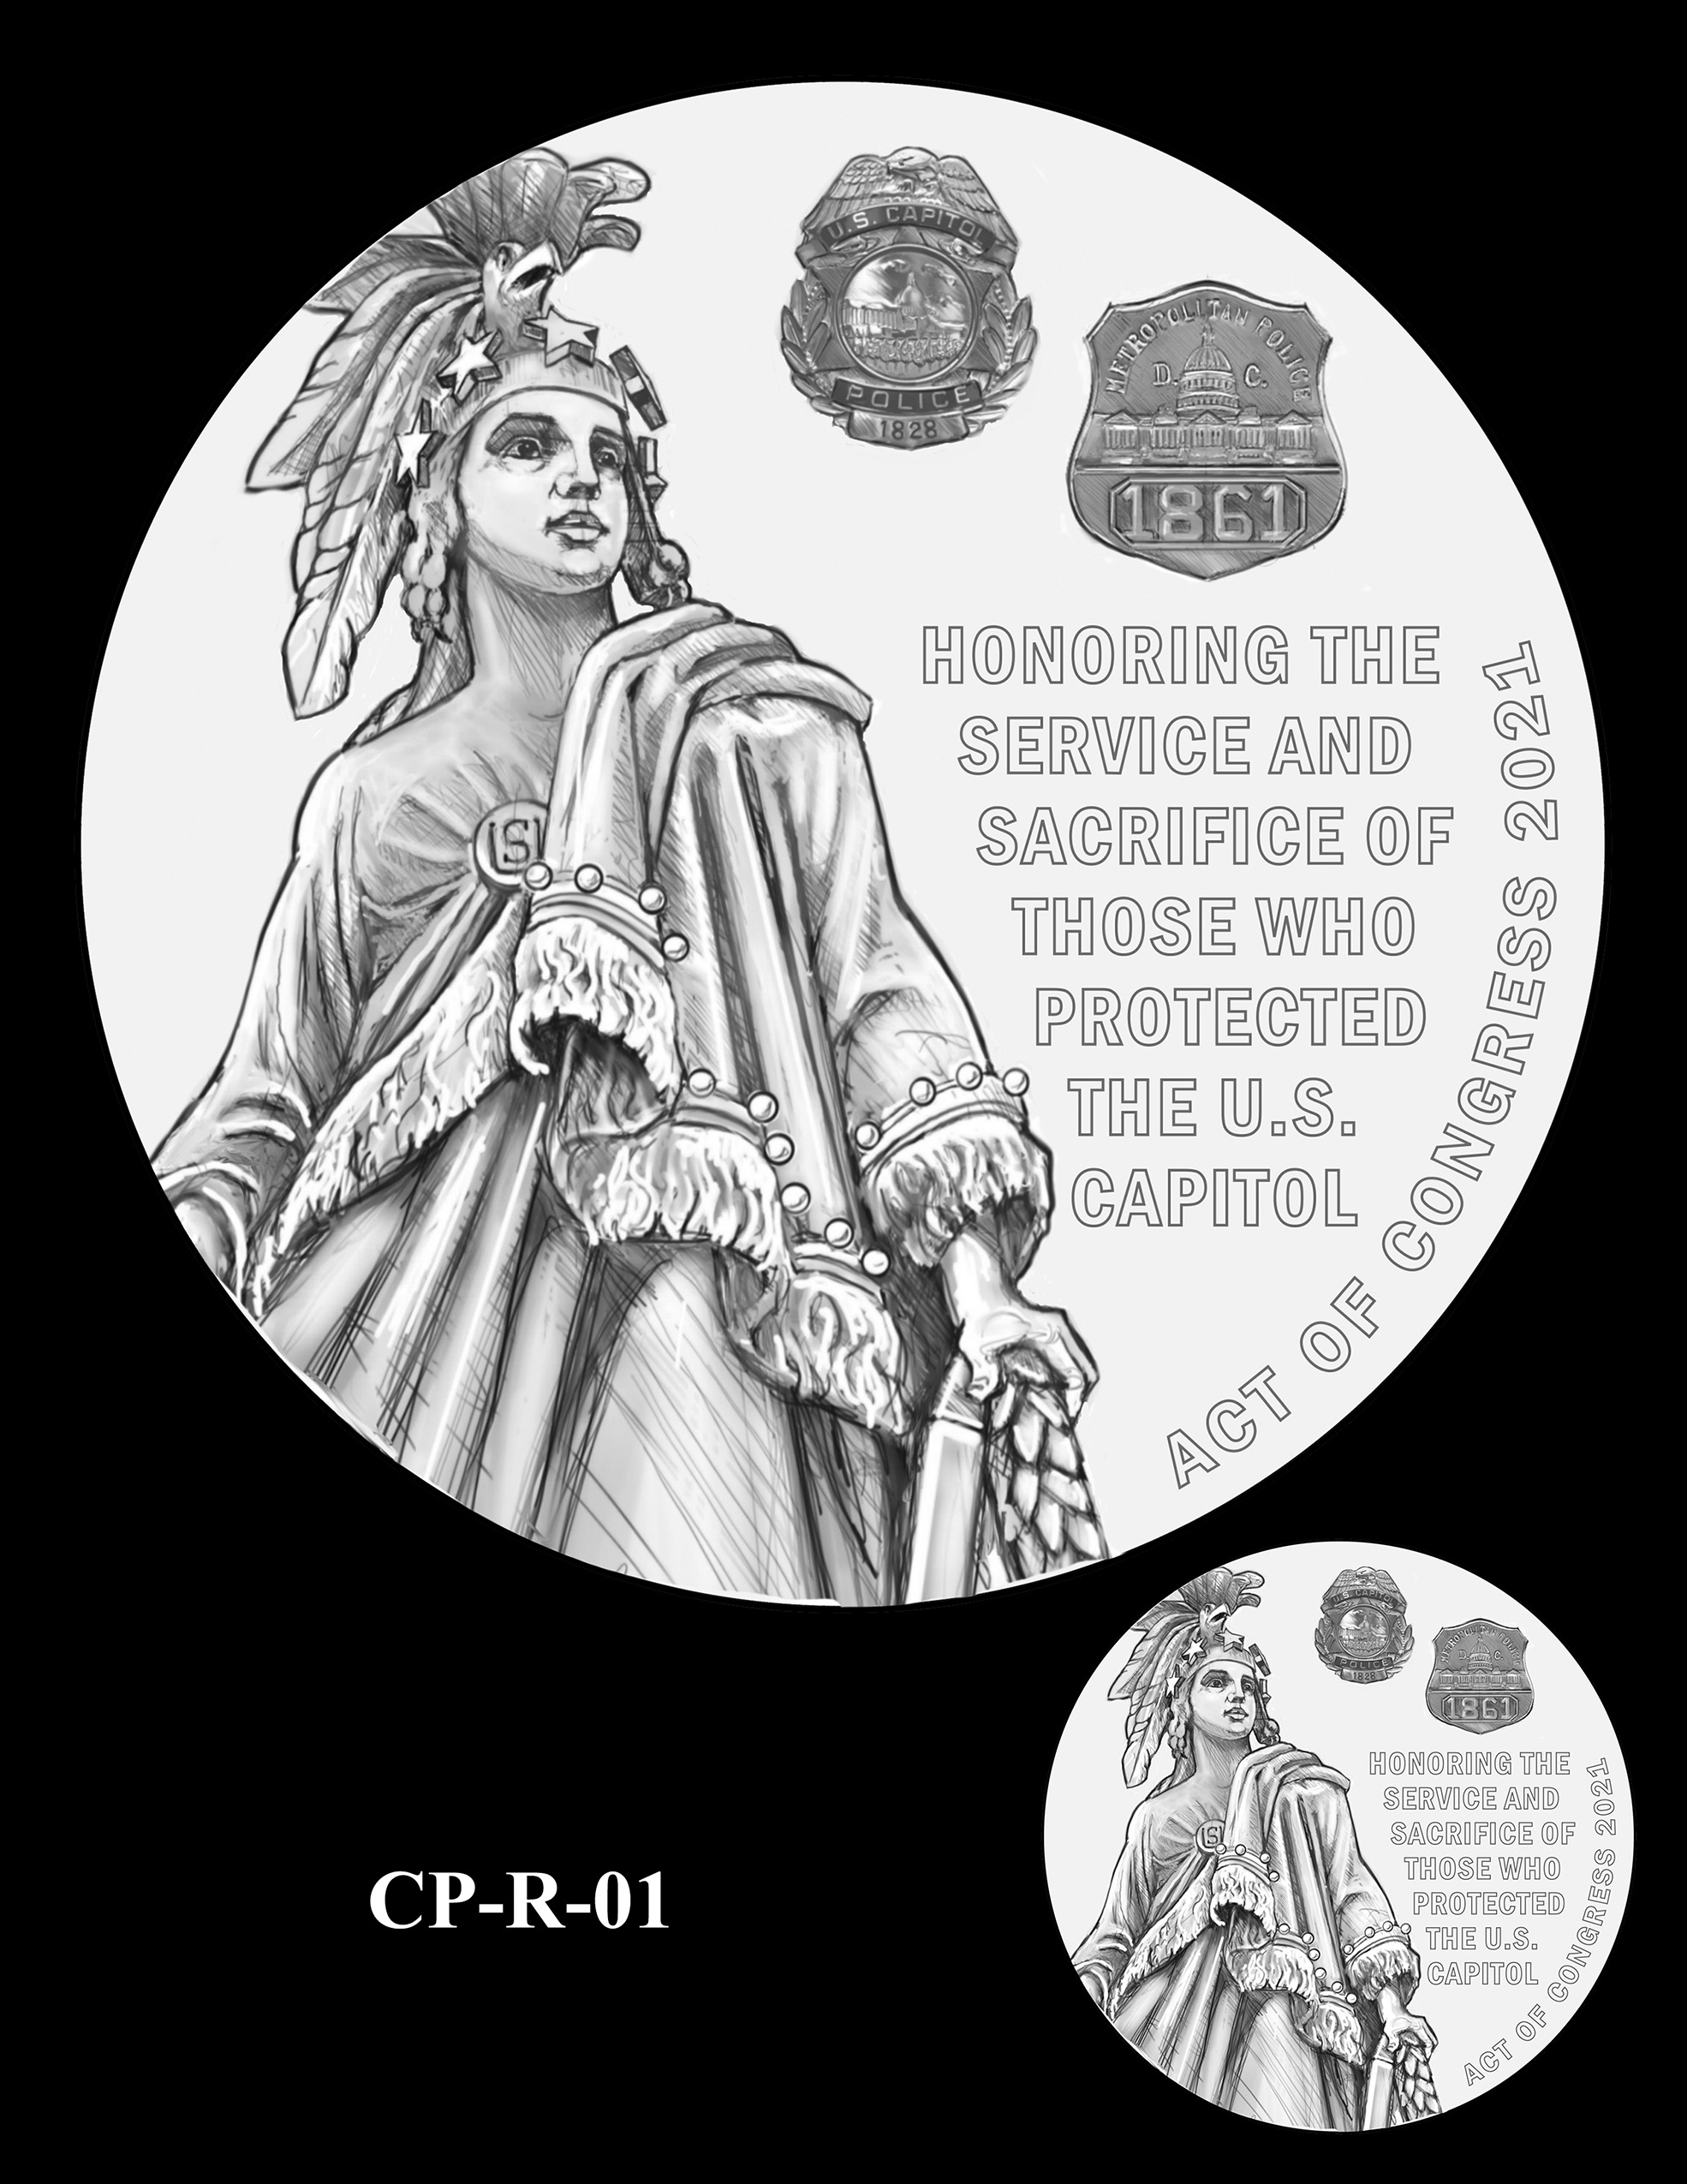 CP-R-01 -- Congressional Gold Medal for Those Who Protected the U.S. Capitol on January 6th 2021